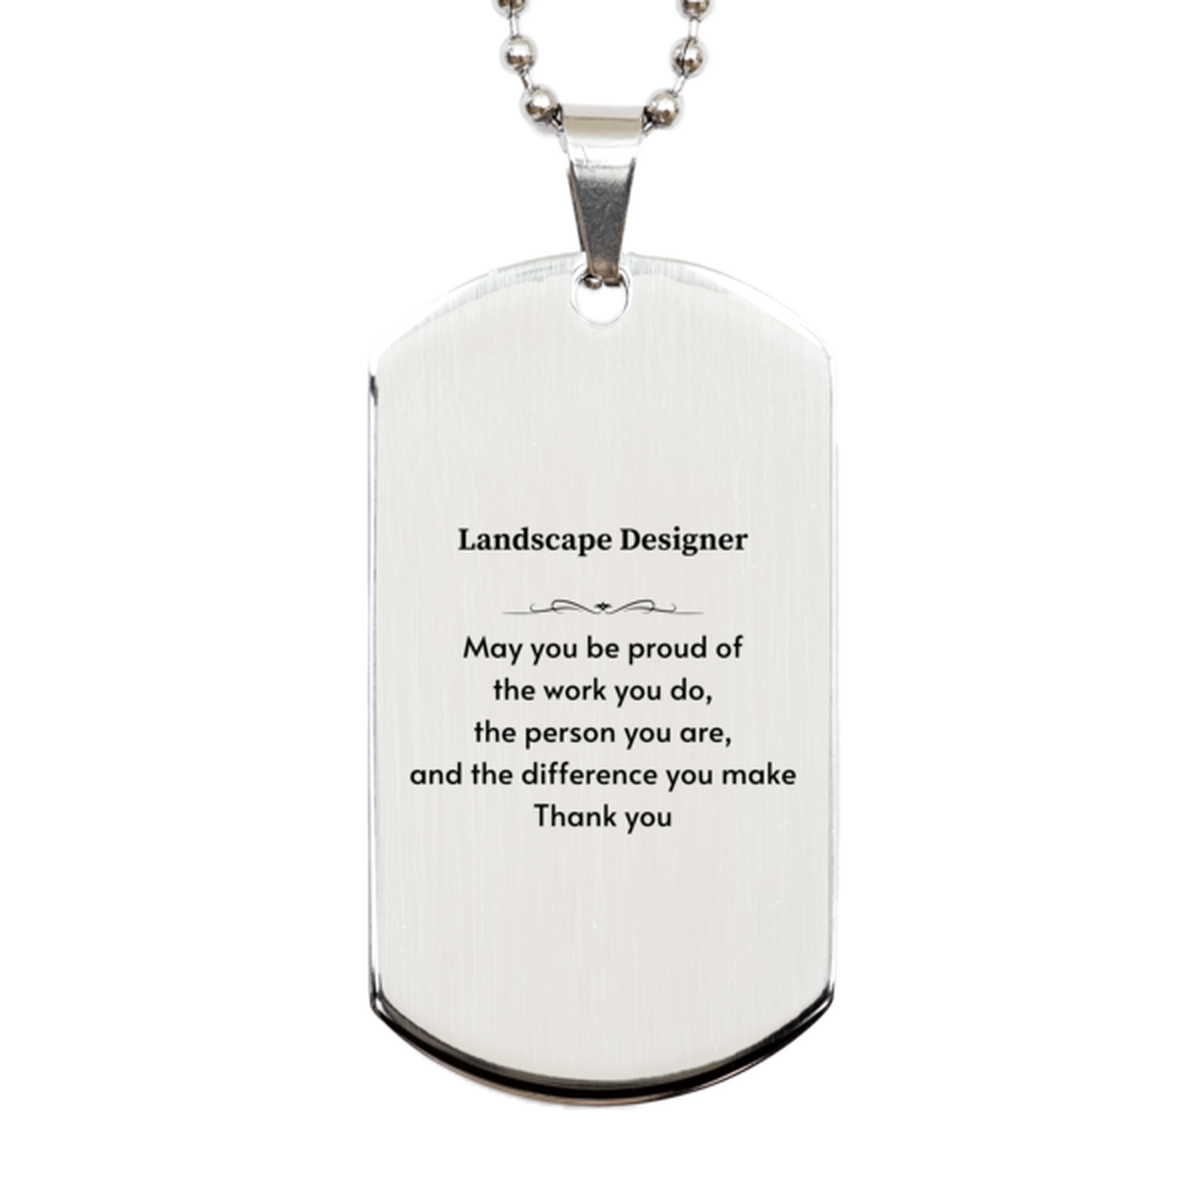 Heartwarming Silver Dog Tag Retirement Coworkers Gifts for Landscape Designer, Landscape Designer May You be proud of the work you do, the person you are Gifts for Boss Men Women Friends